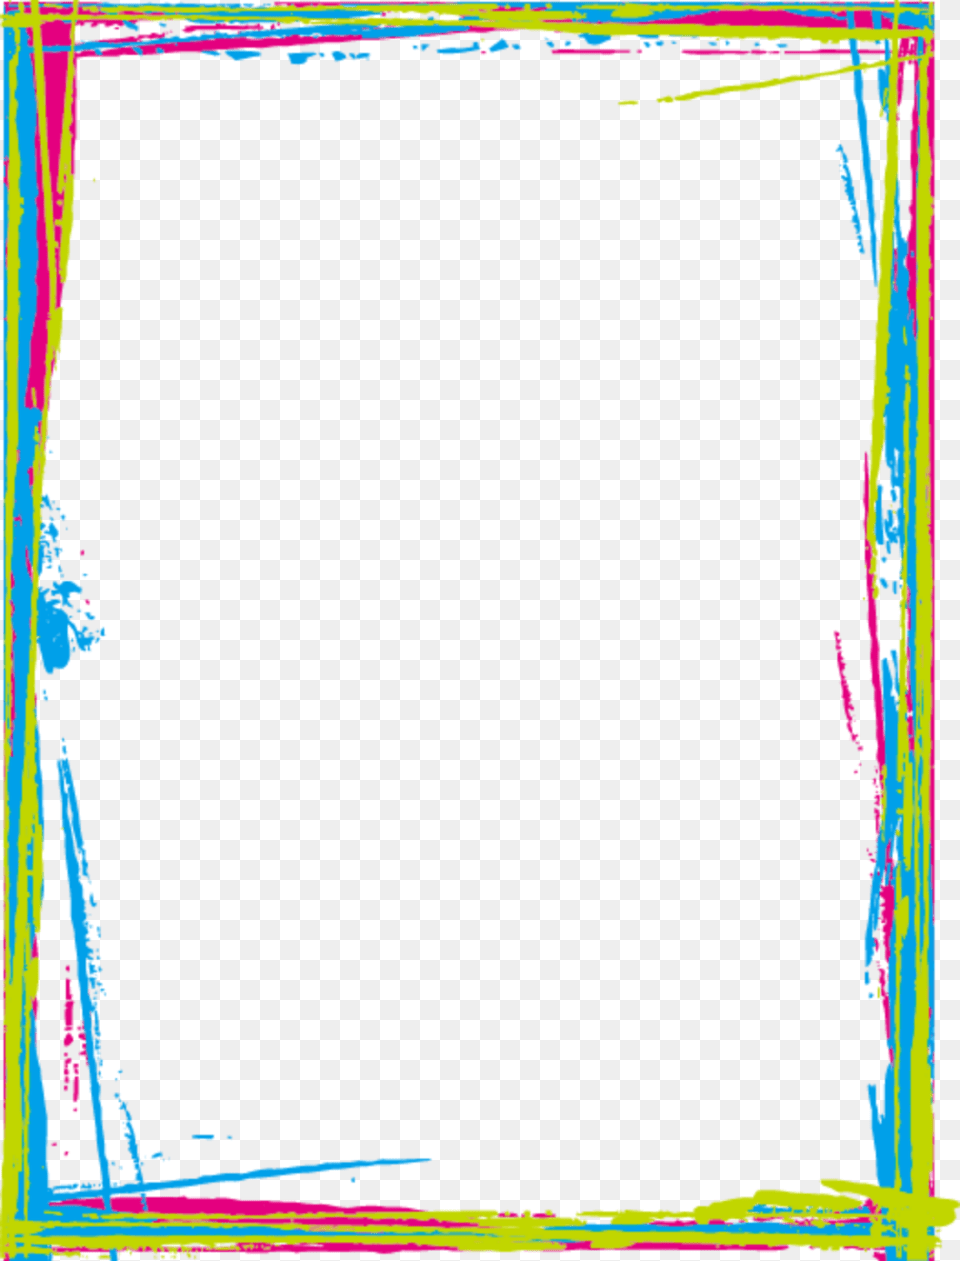 Ftestickers Frame Borders Linedrawing Cute Colorful Colorful Border, Art, Blackboard, Purple Free Transparent Png